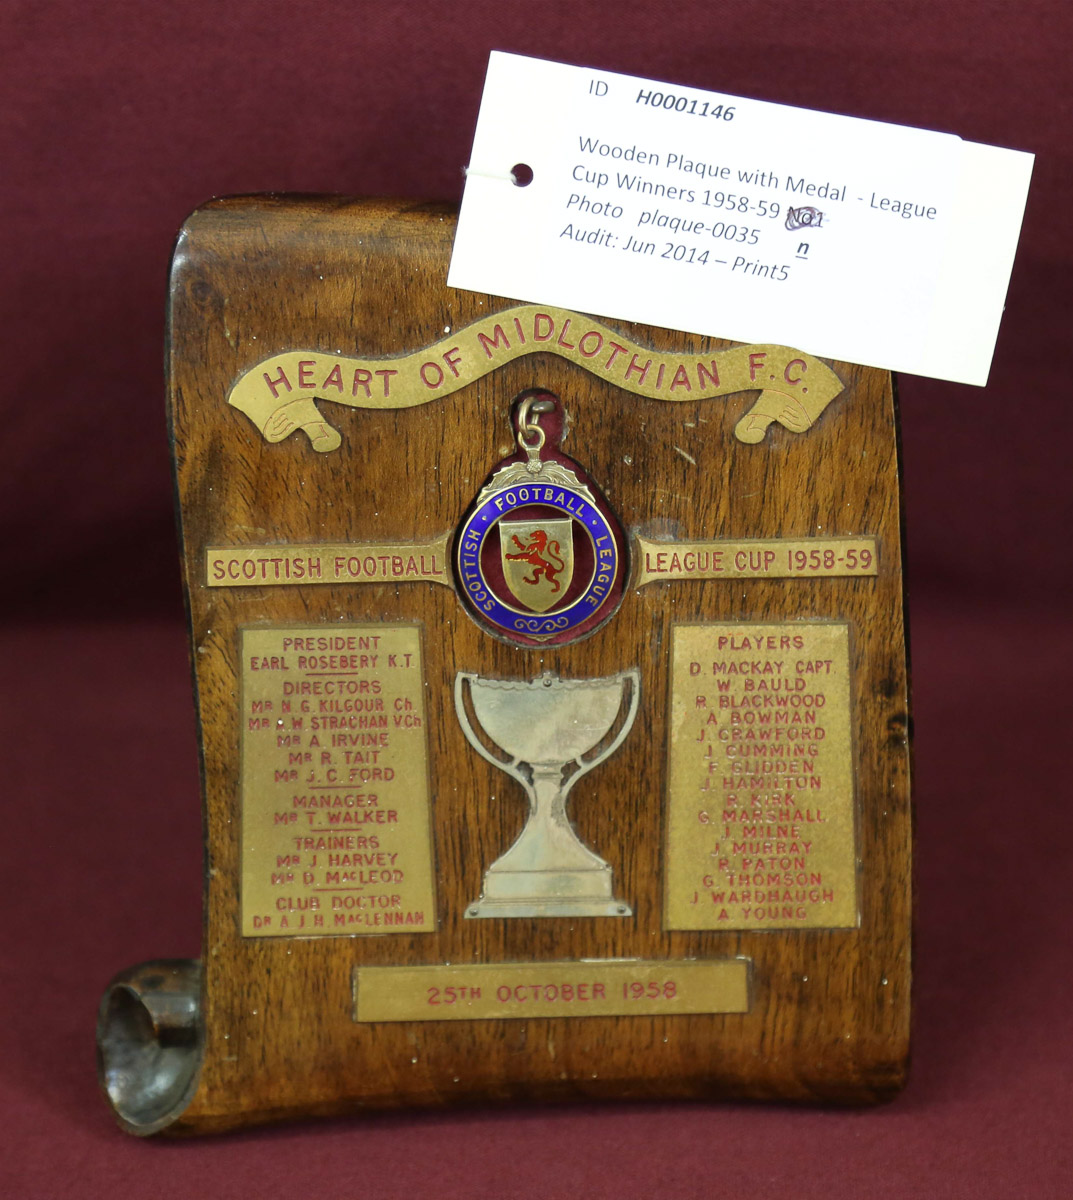 Wooden Plaque with Medal - League Cup Winners 1958-59